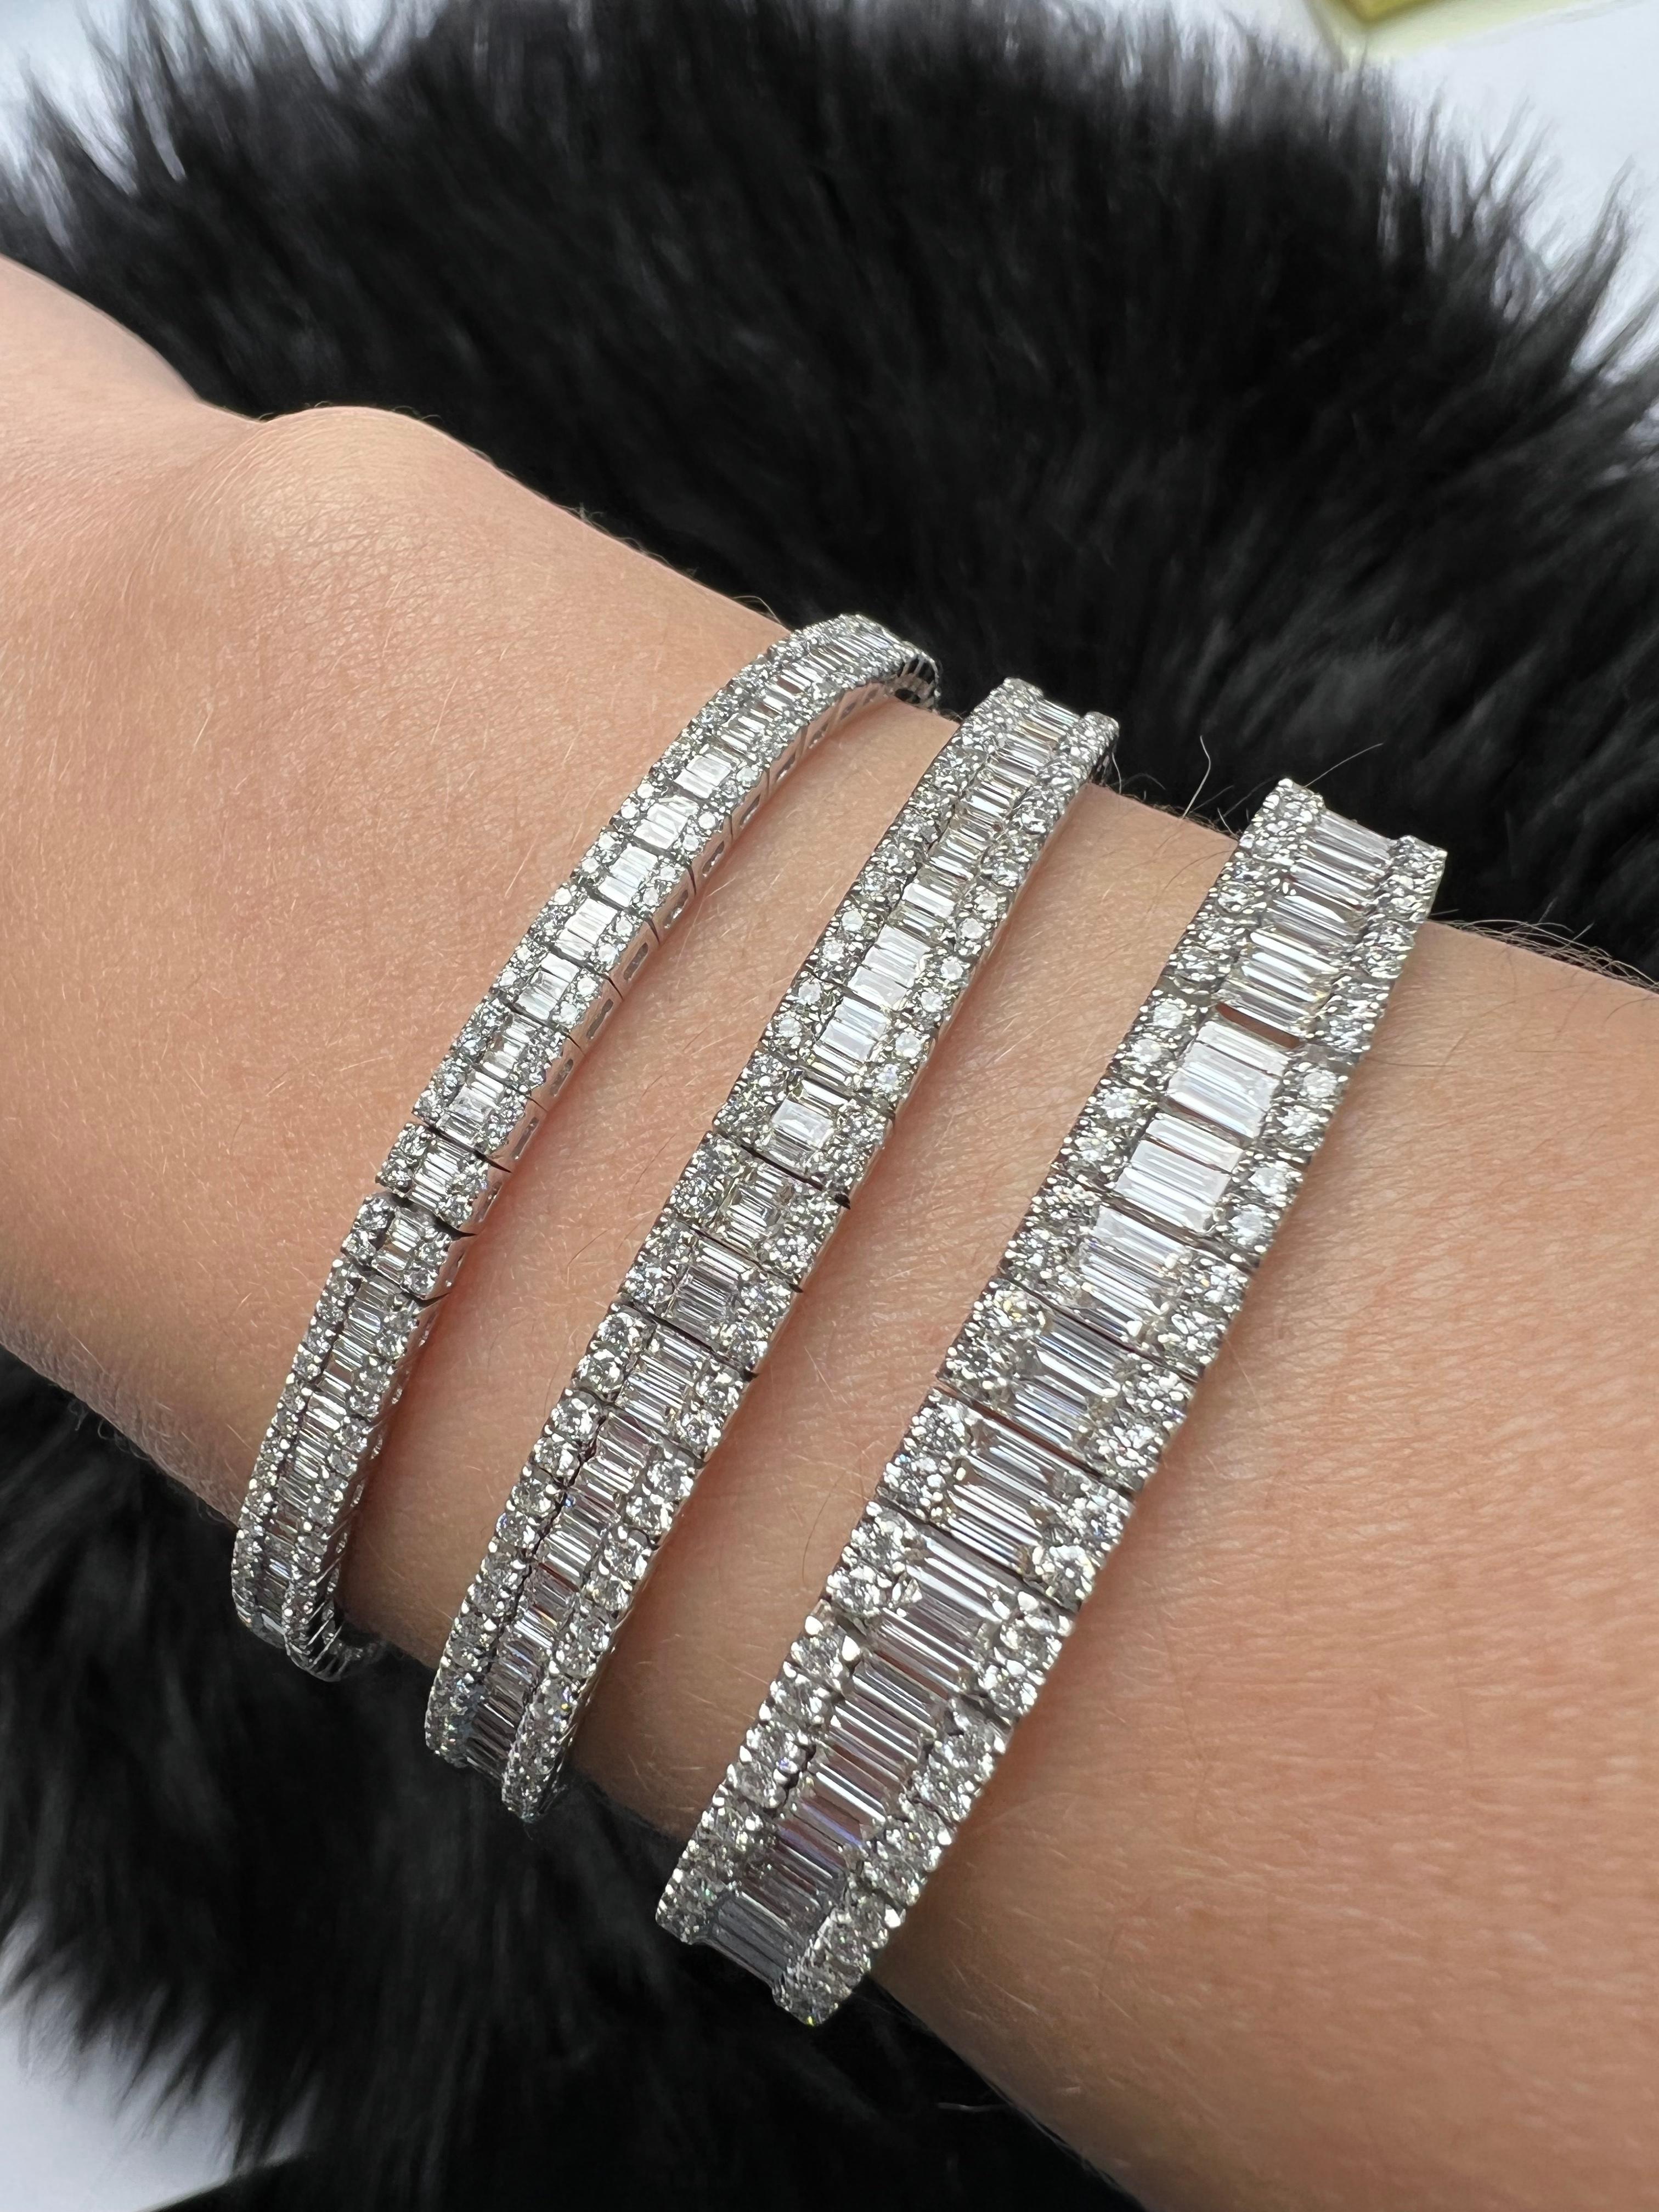 Natural Diamonds 6.7 carats 18KT White Gold Baguette Tennis Bracelet In New Condition For Sale In Antwerpen, BE